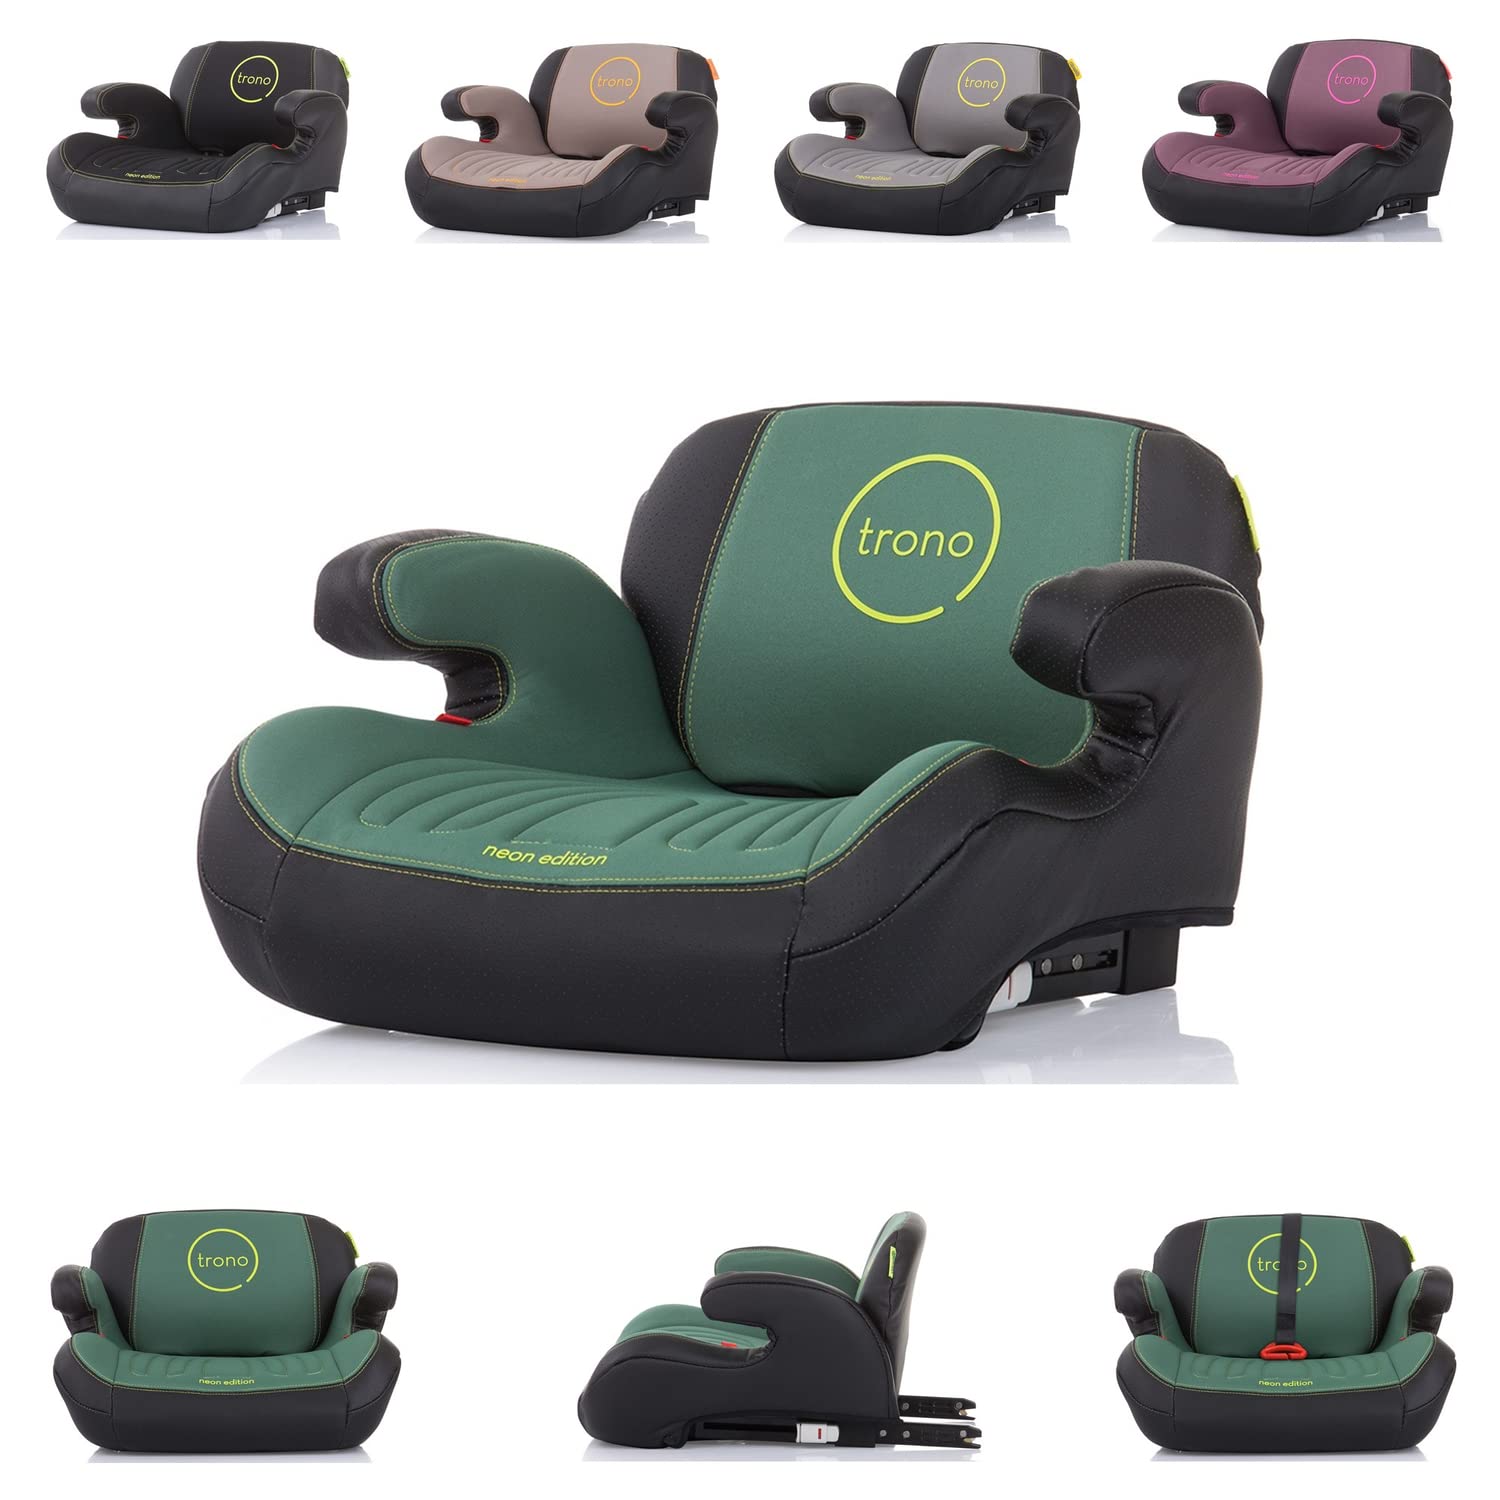 Chipolino Trono Isofix Child Booster Seat Group 3 (22-36 kg) Green